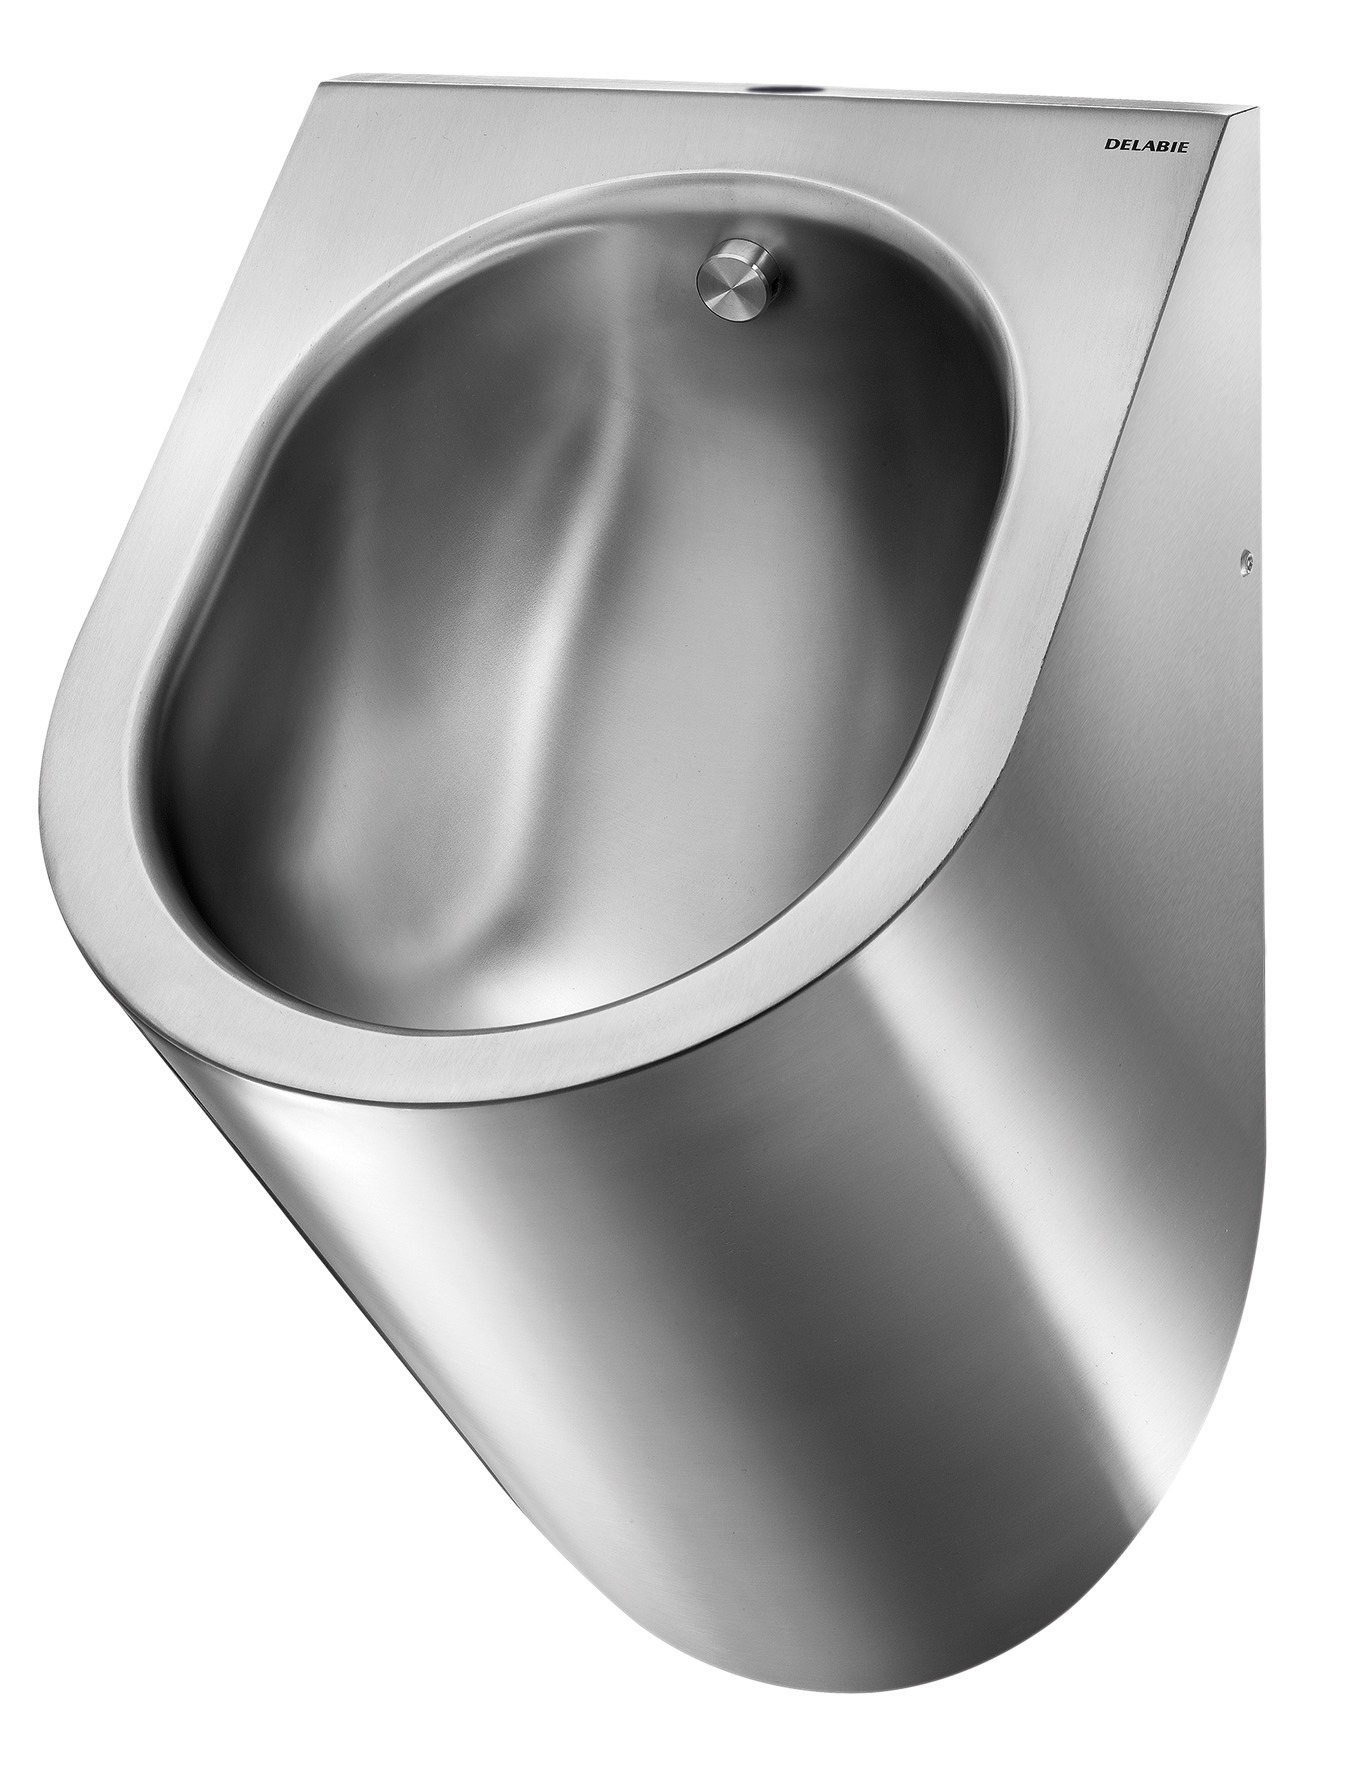 DELTA wall mtd urinal top inlet 304 stainless s steel satin (ex-0311160002)